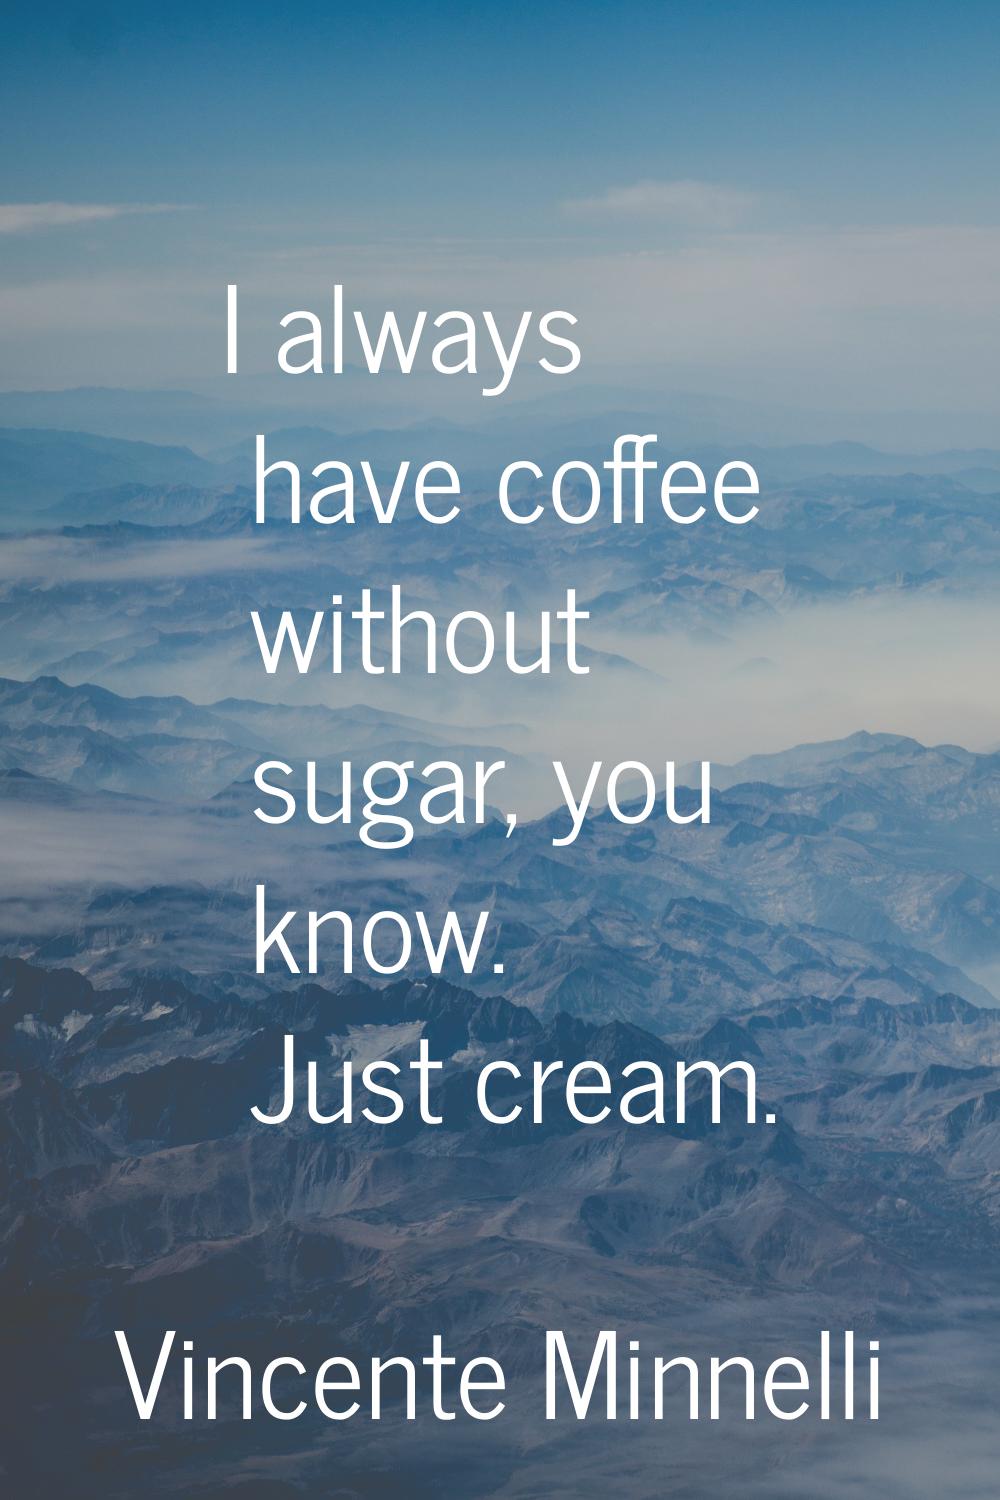 I always have coffee without sugar, you know. Just cream.